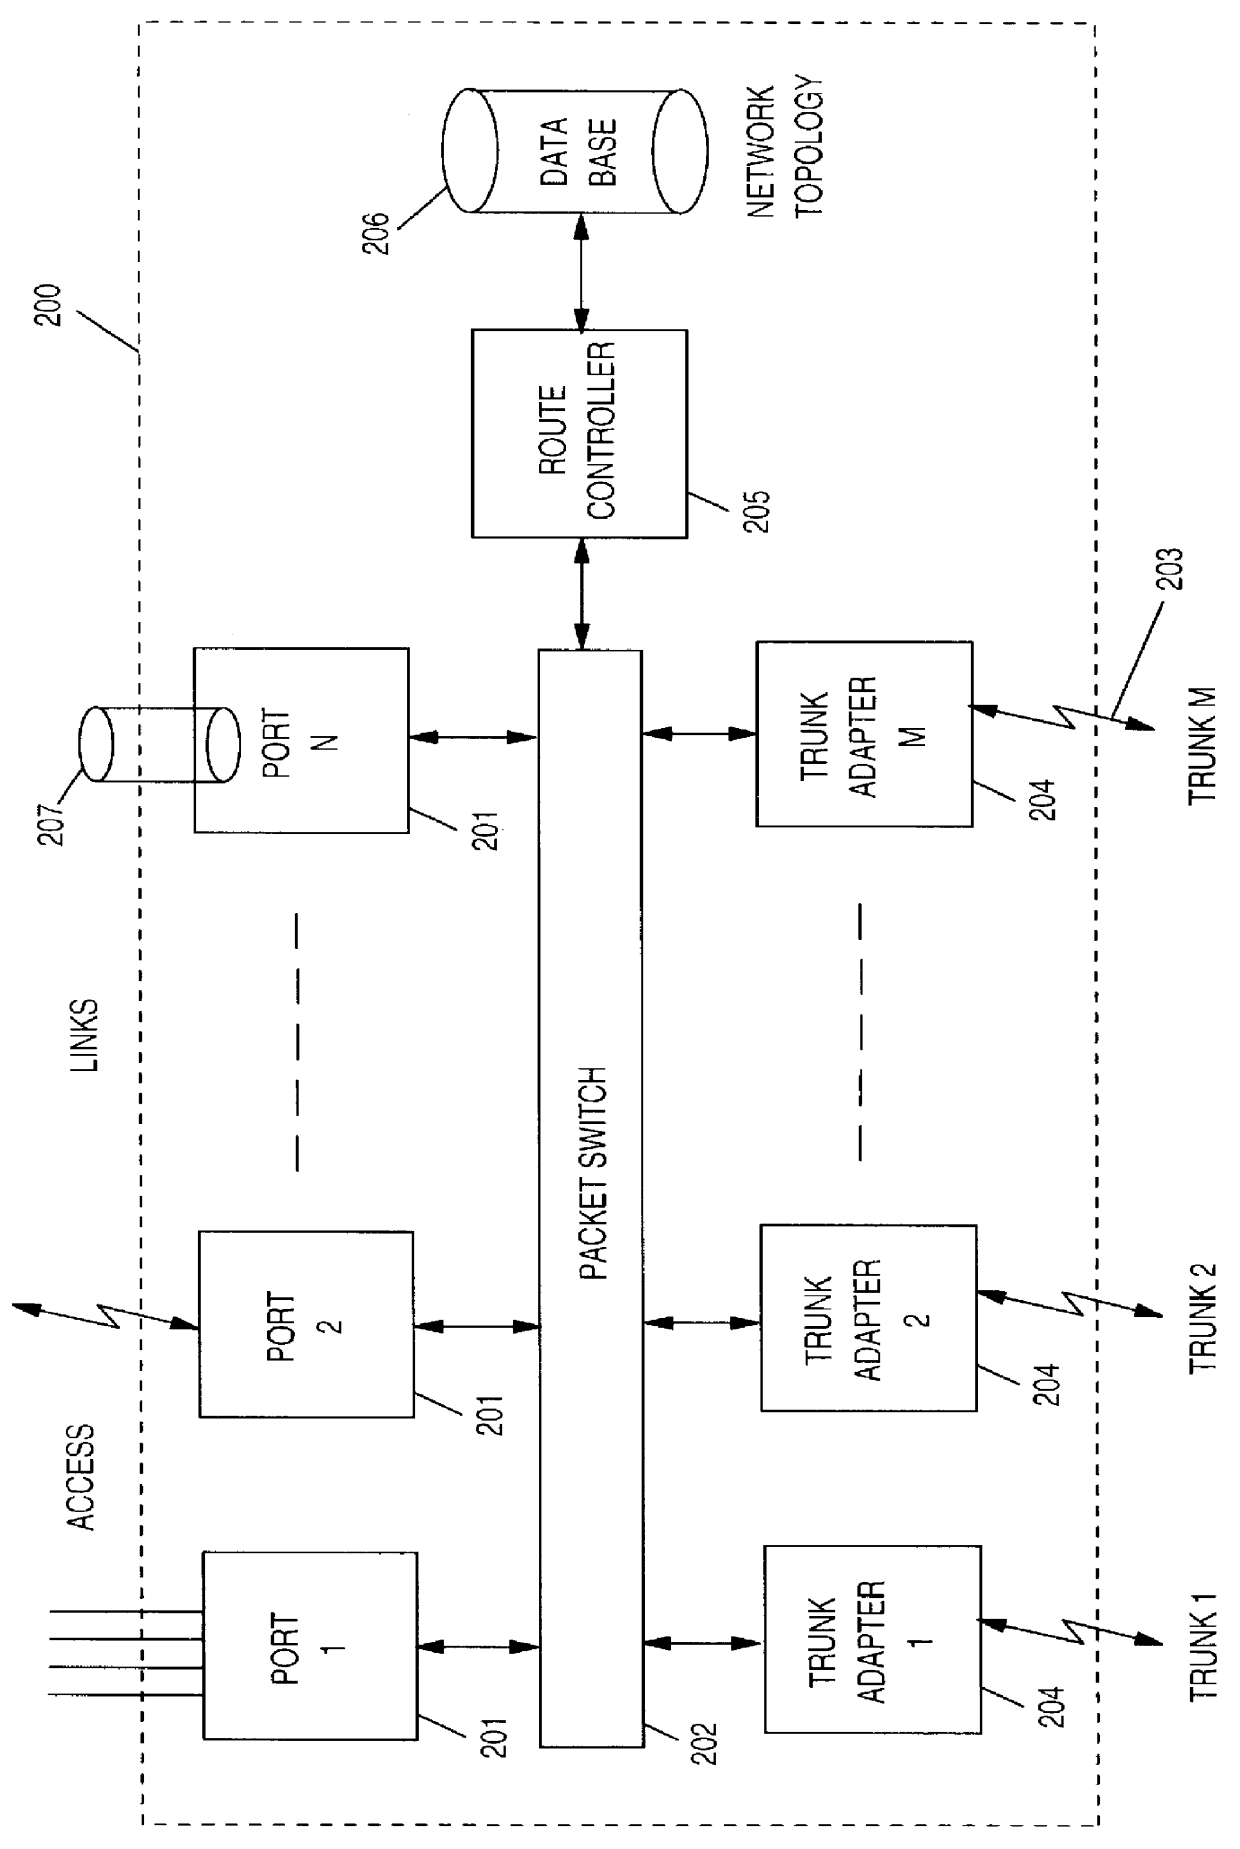 Method and system for optimizing the connection set up time in high speed communication networks for recovering from network failure